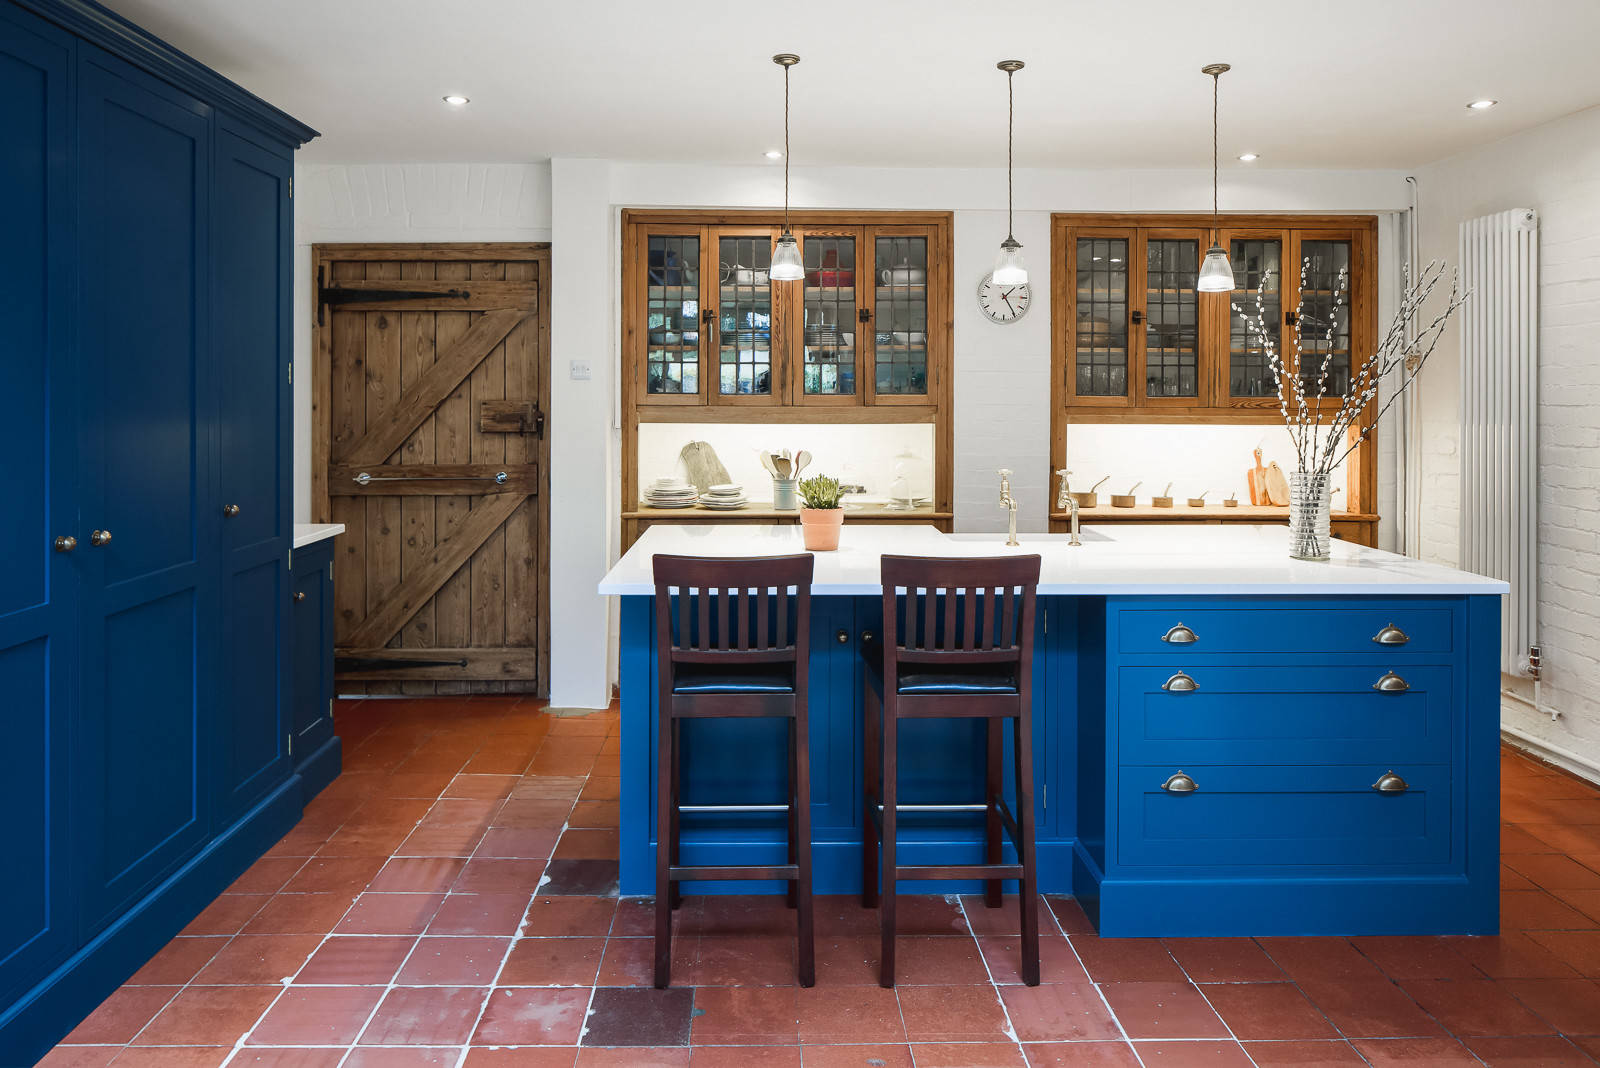 75 Terra-Cotta Tile Kitchen with Blue Cabinets Ideas You'll Love